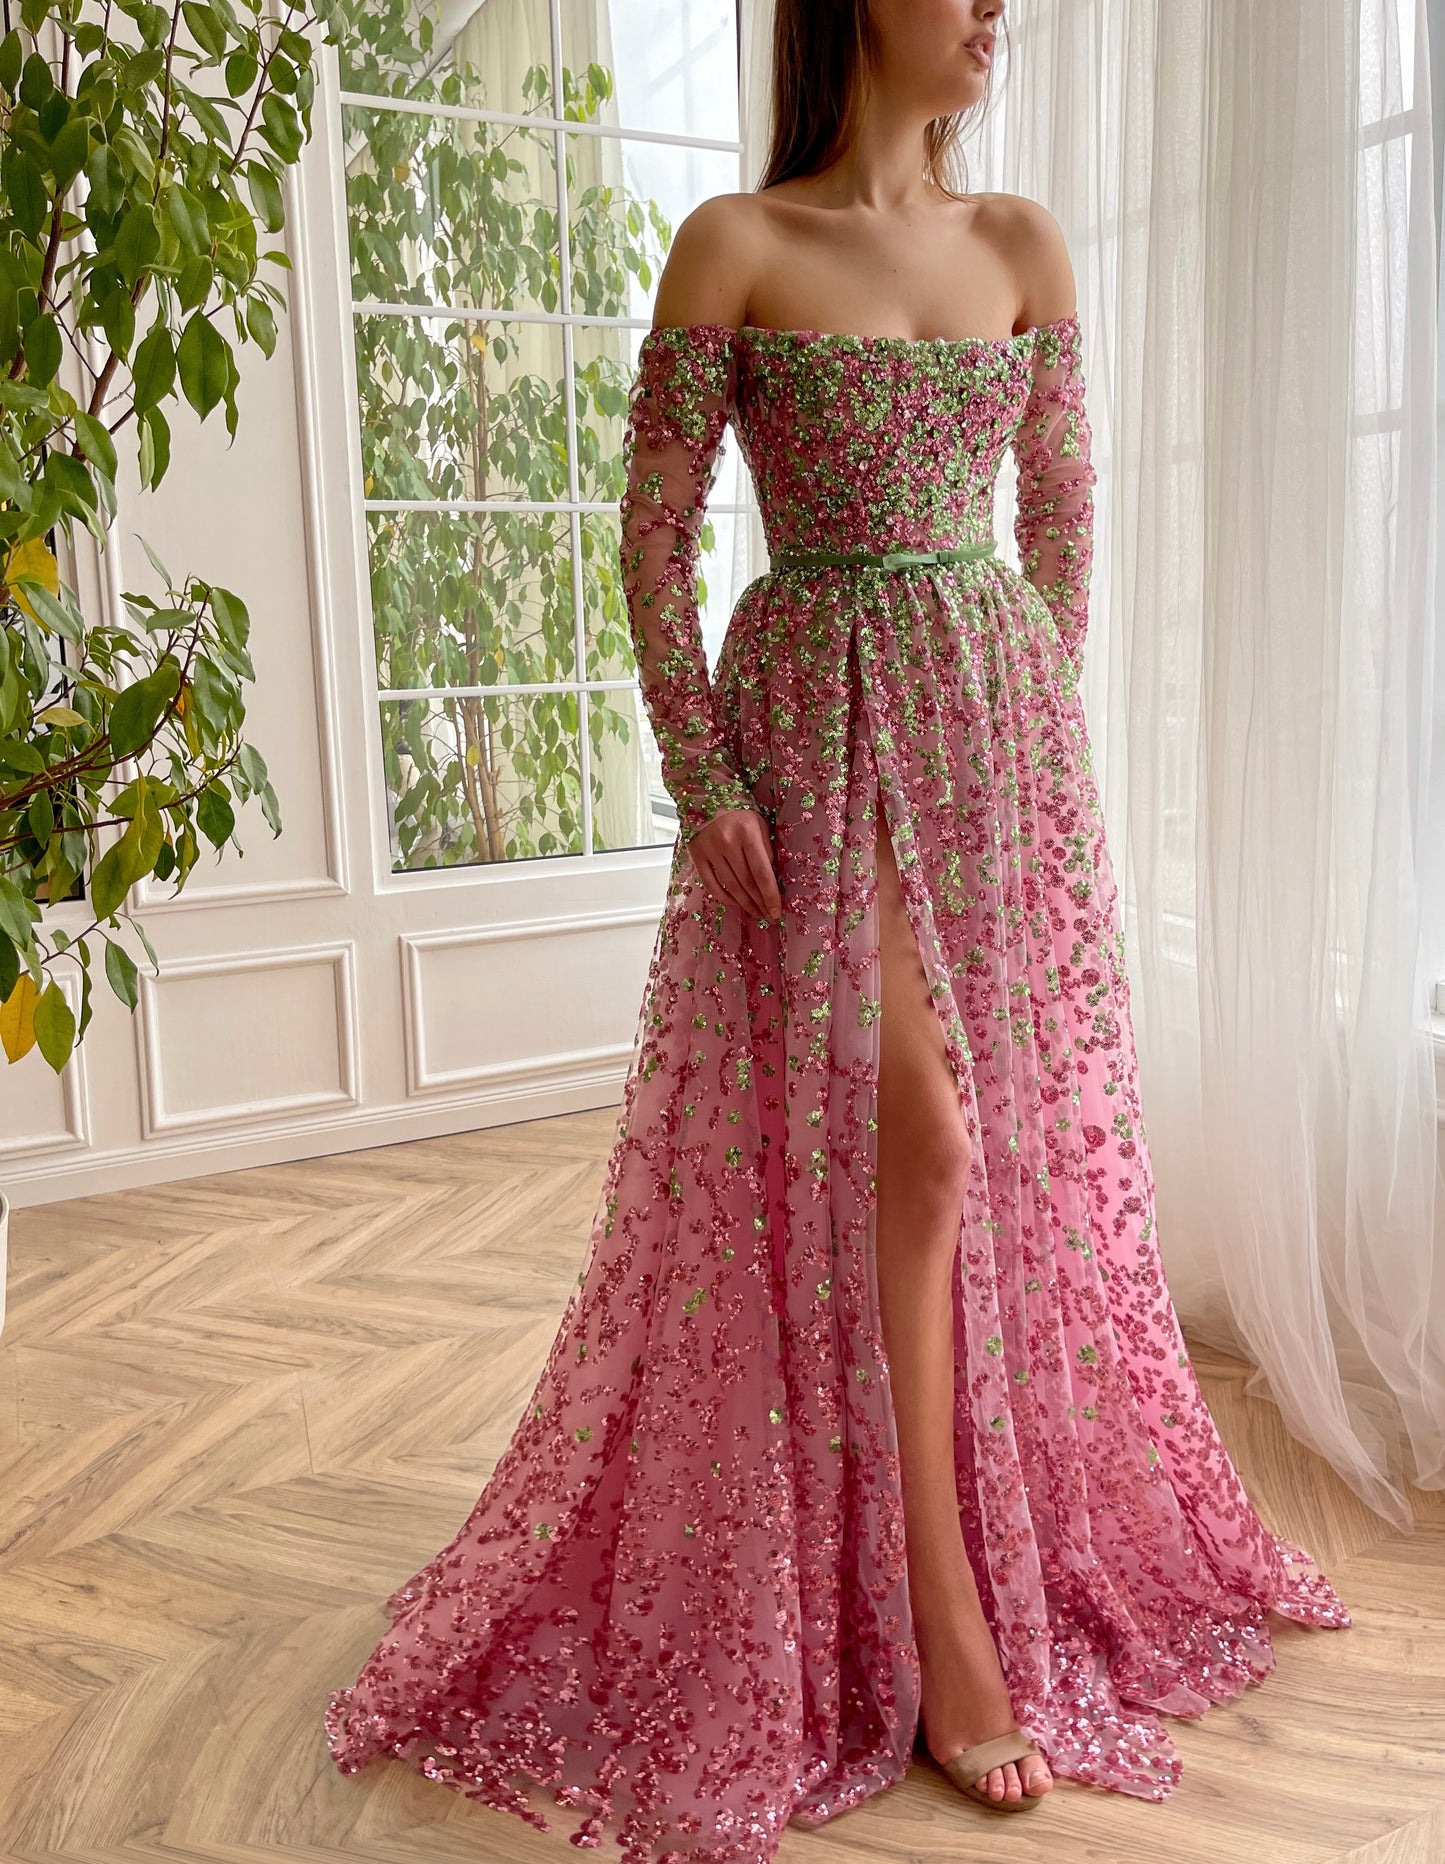 Pink A-Line dress with long off the shoulder sleeves and embroidery